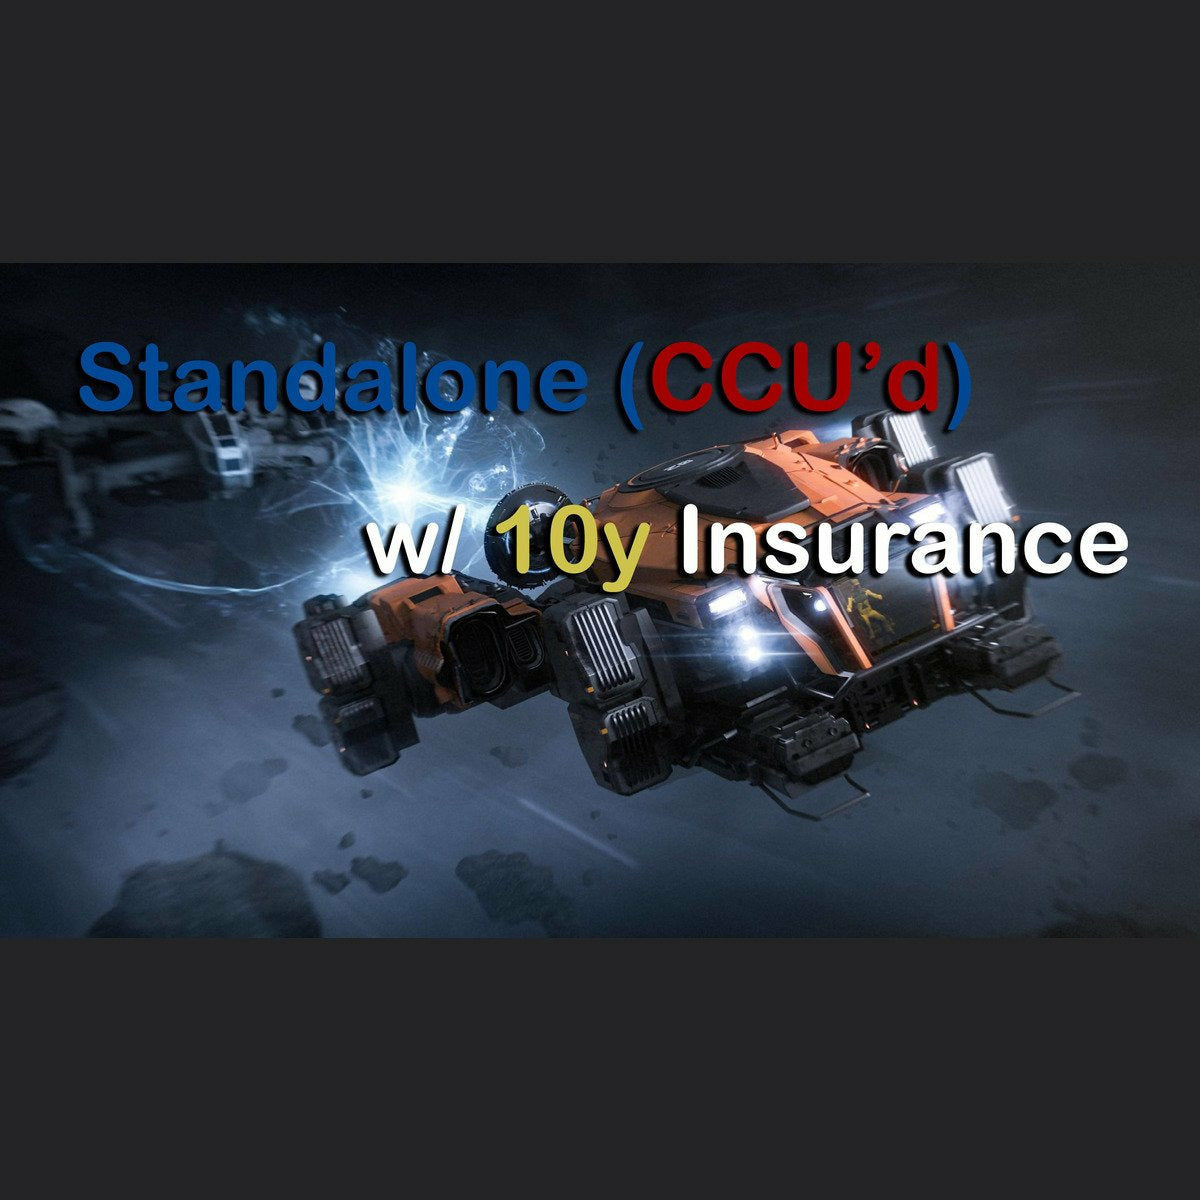 SRV - 10y Insurance | Space Foundry Marketplace.